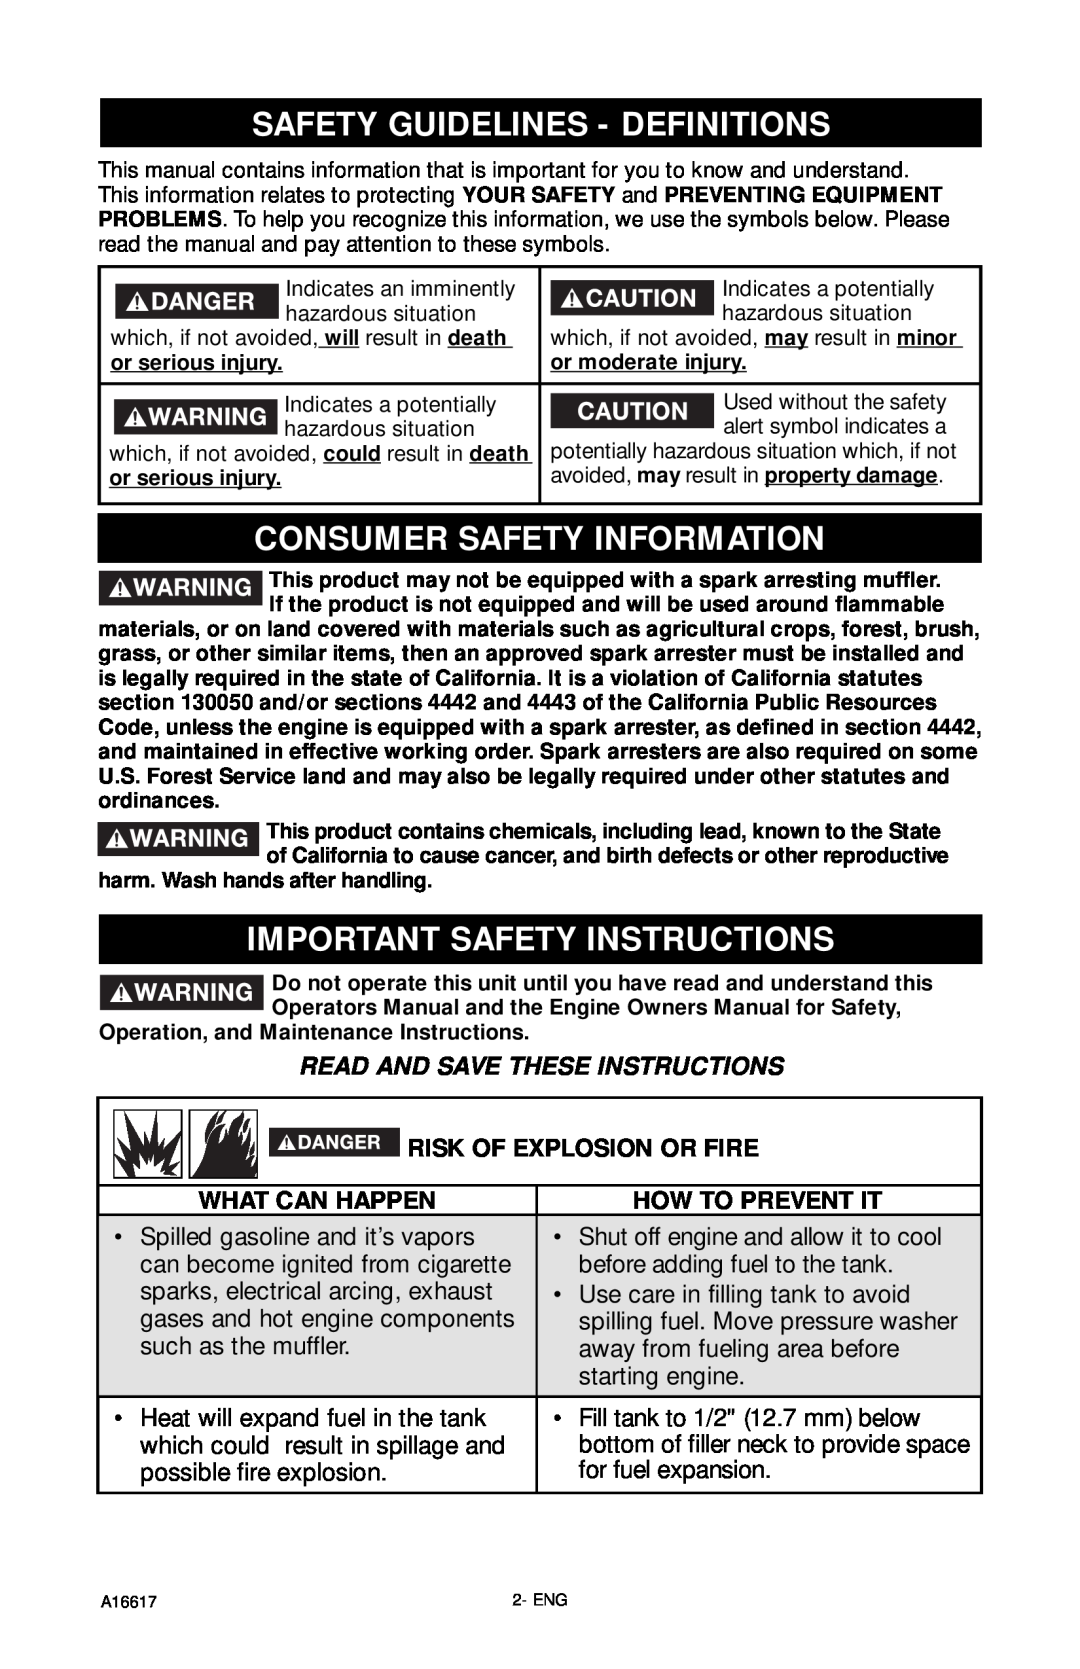 DeVillbiss Air Power Company XR2625, A16617 Safety Guidelines - Definitions, Consumer Safety Information, What Can Happen 